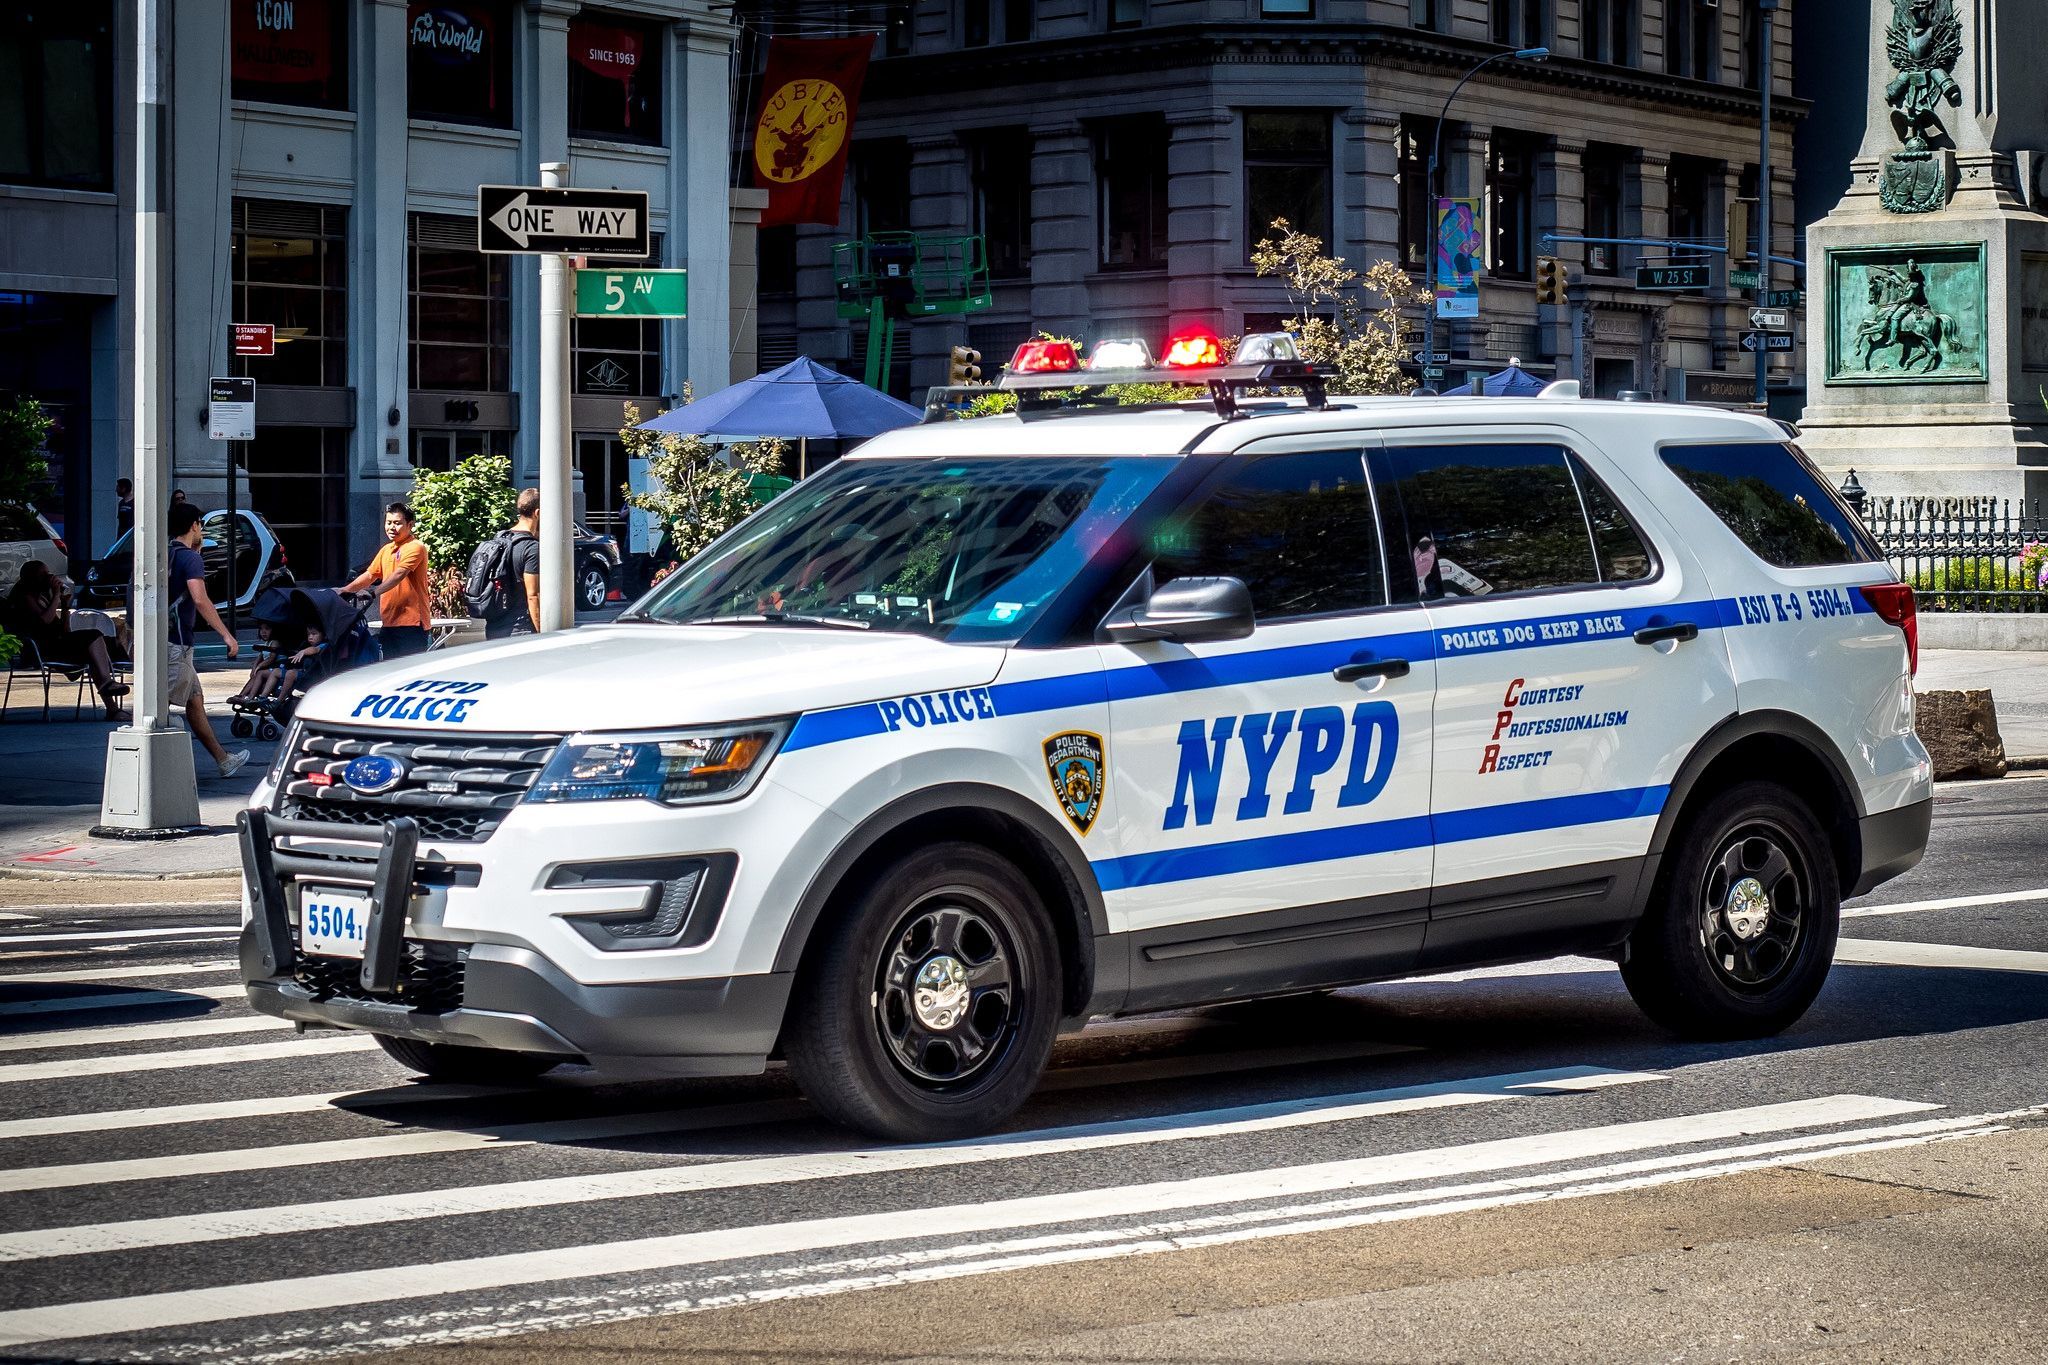 Best NYPD image. Nypd, New york police, Police